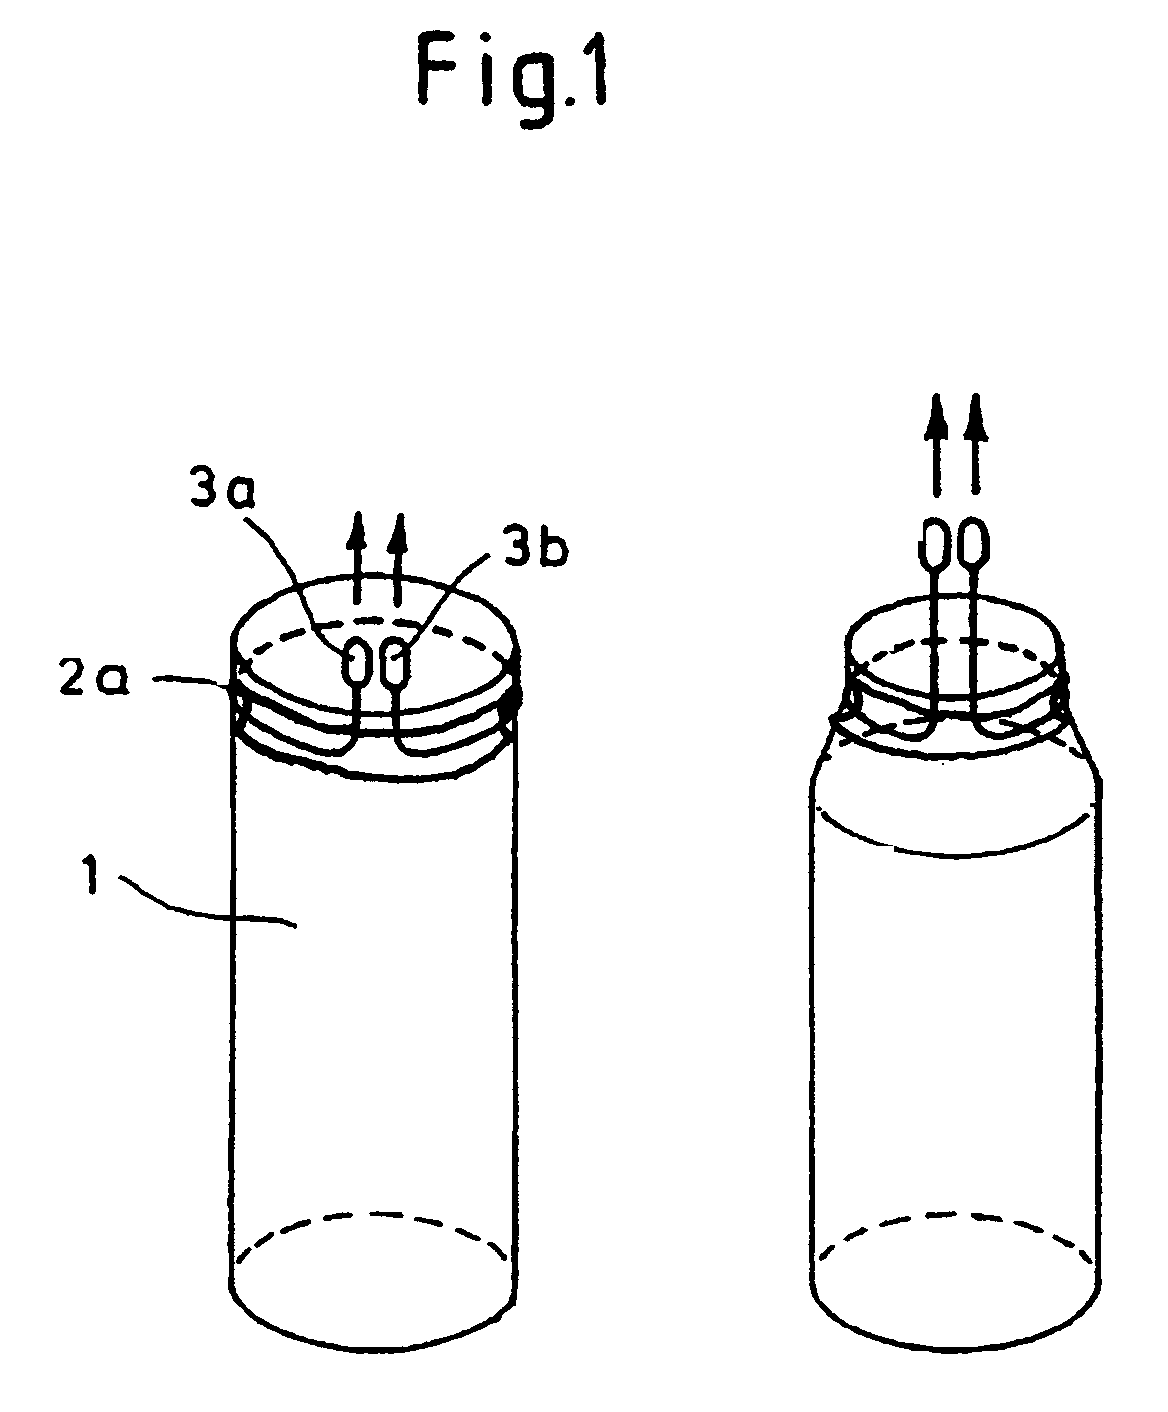 Removable essentially cylindrical implants